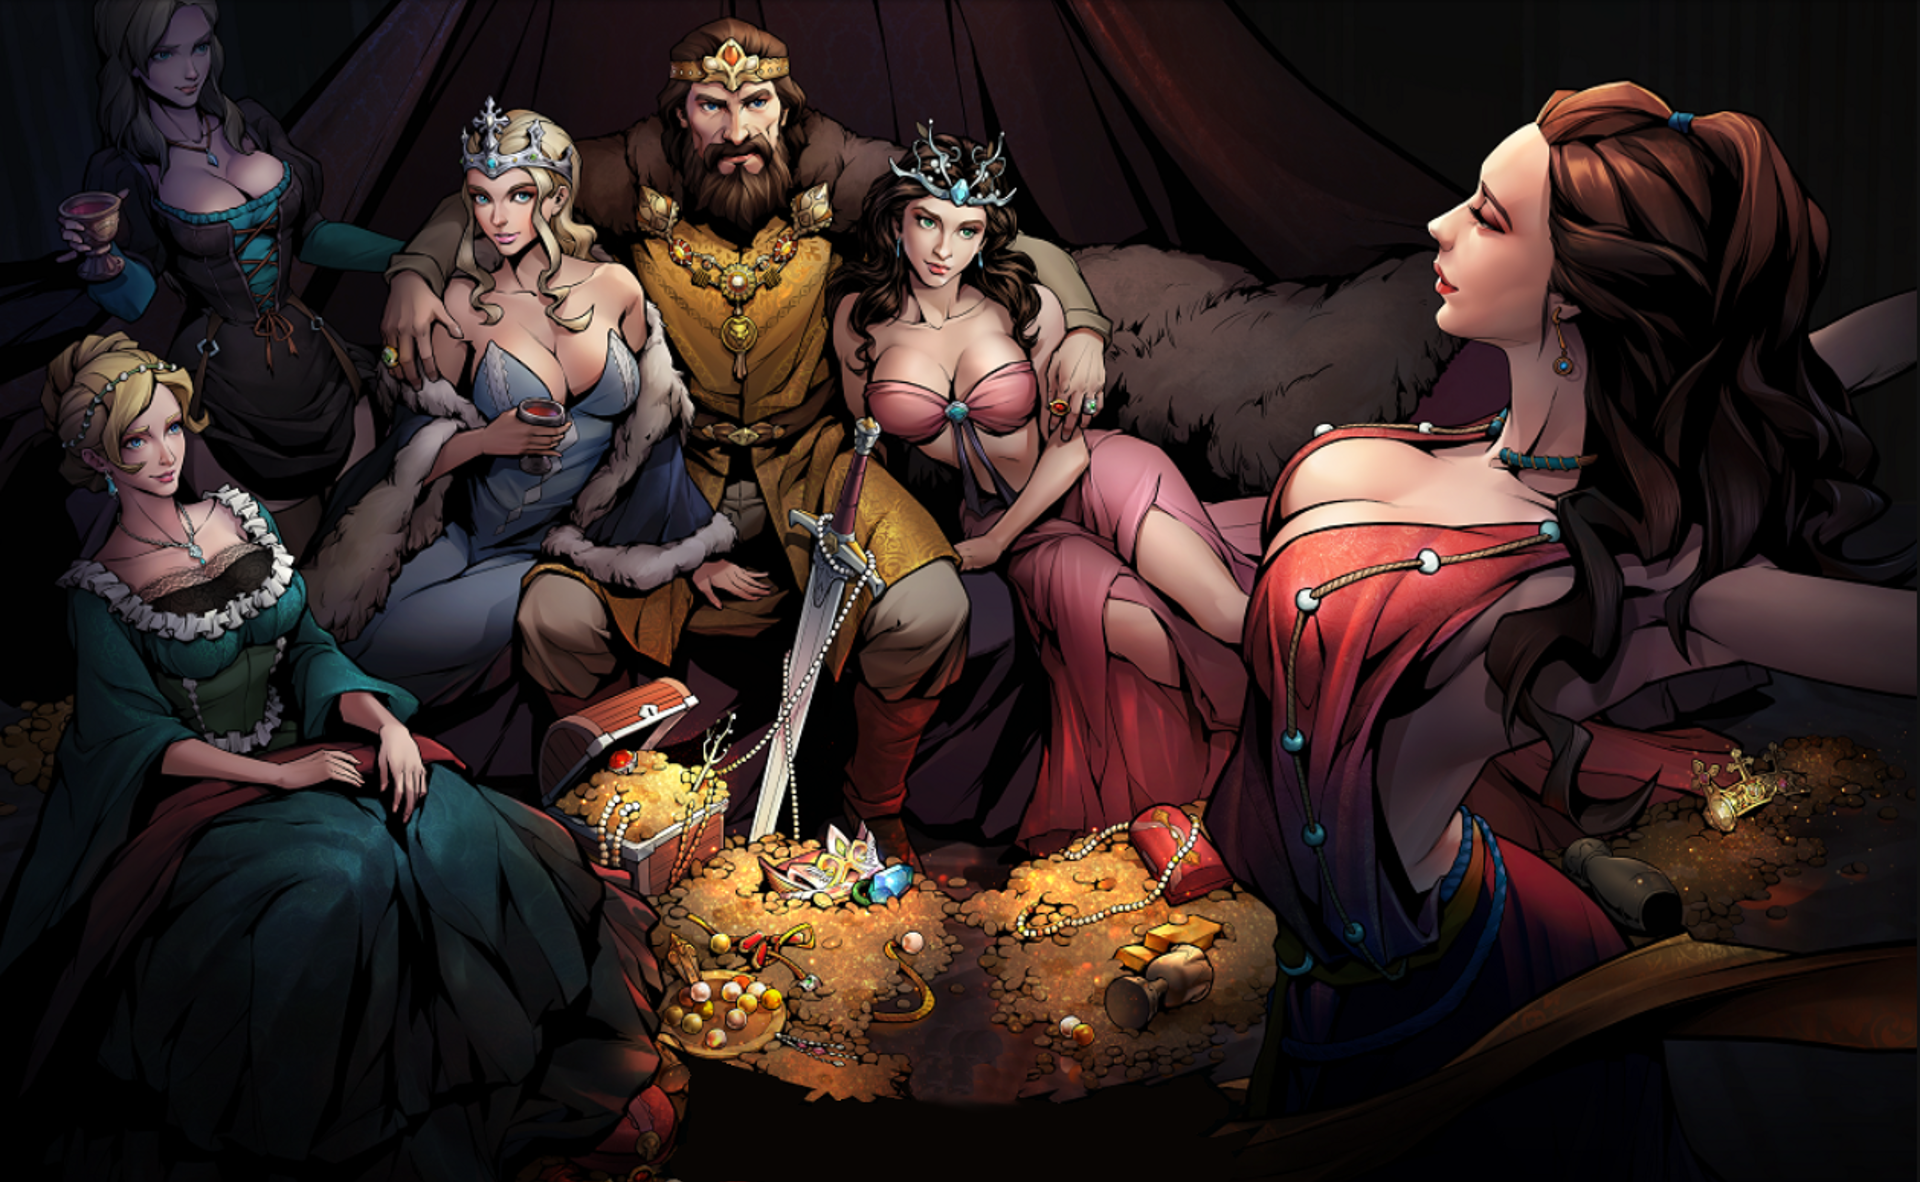 King's Throne: Game of Lust is a free MMORPG available for mobile phon...